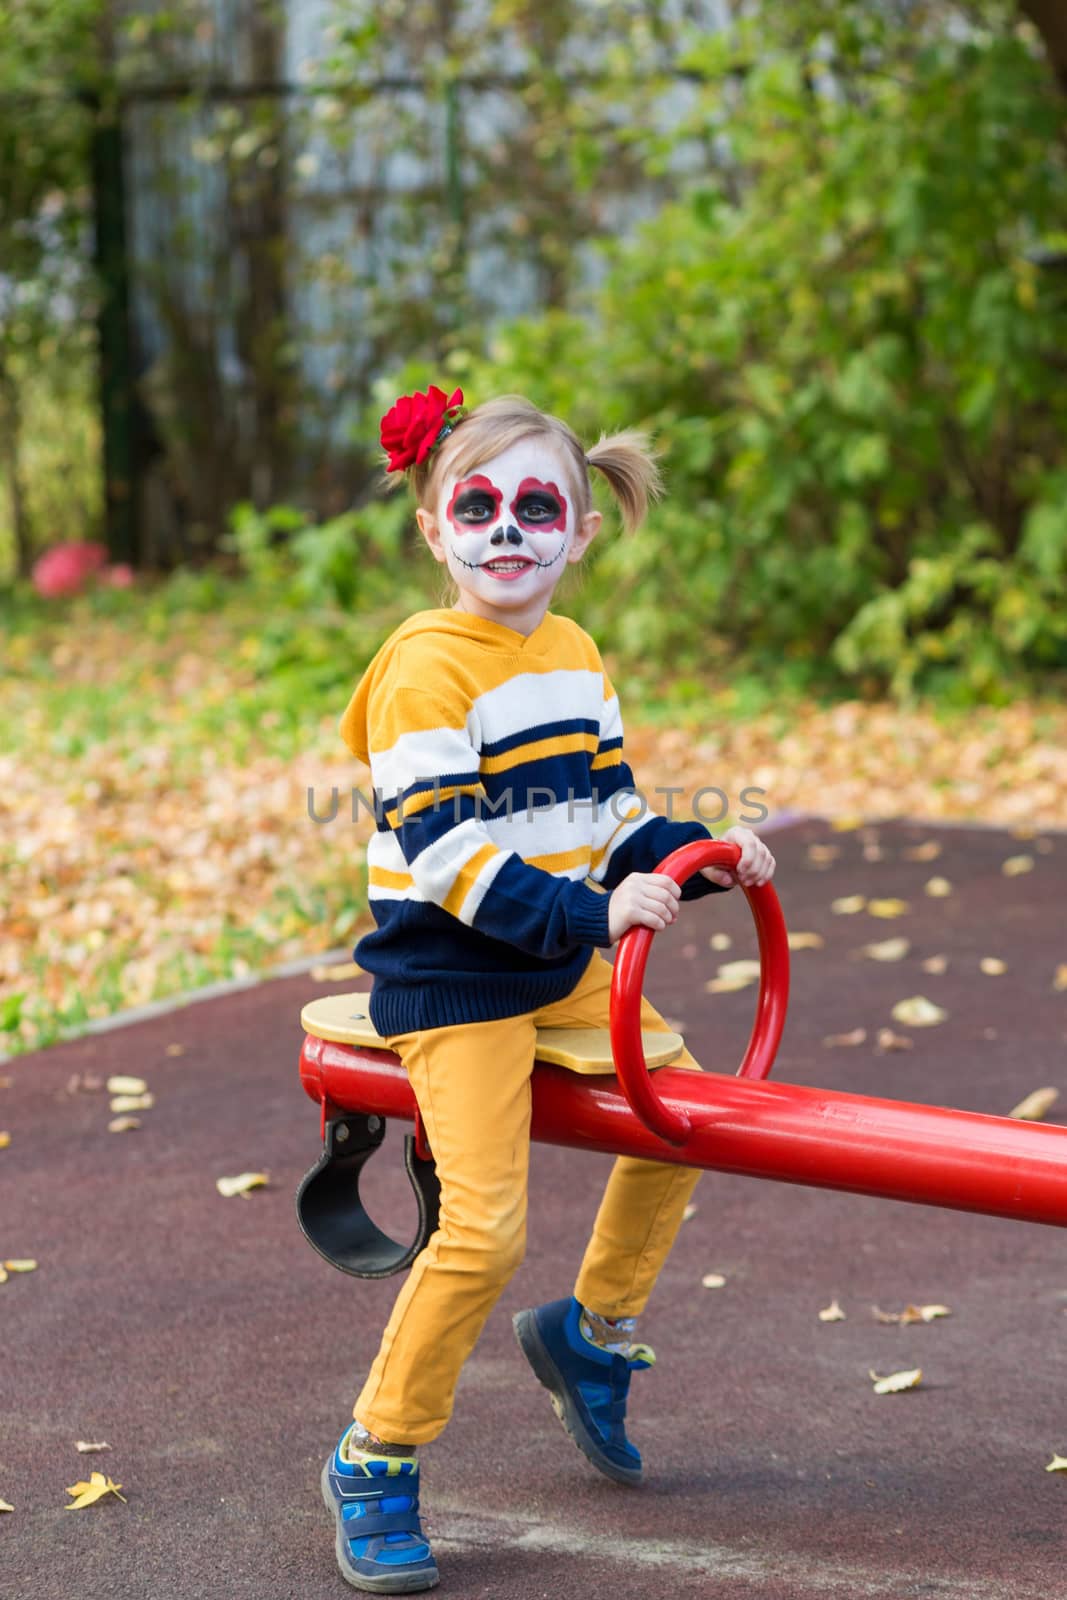 A little girl rides on a swing in the playground, on Day of the Dead. by galinasharapova